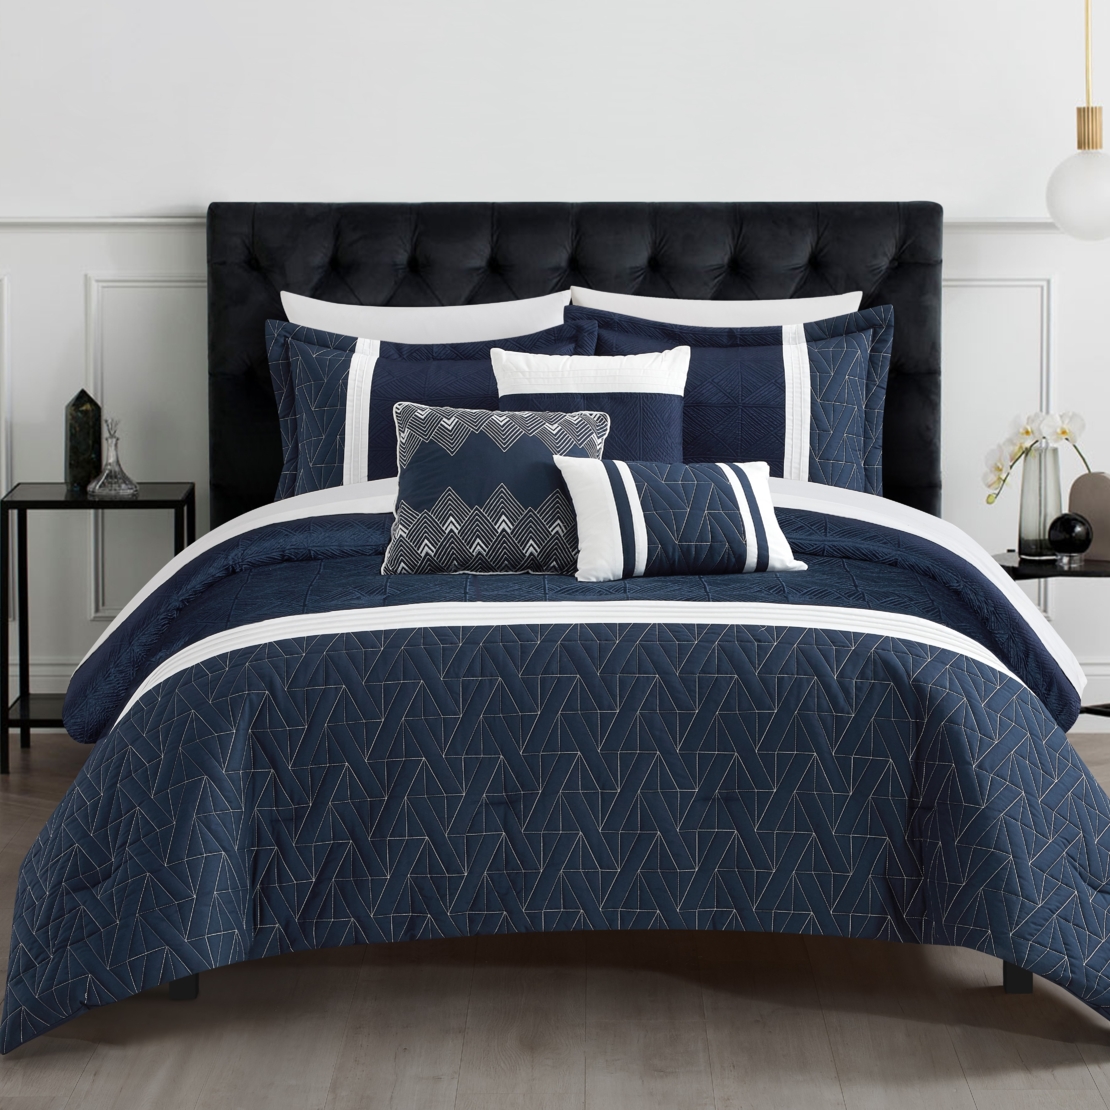 Macy 6 Piece Comforter Set Jacquard Woven Geometric Design Pleated Quilted Details Bedding - navy, king - king navy blue